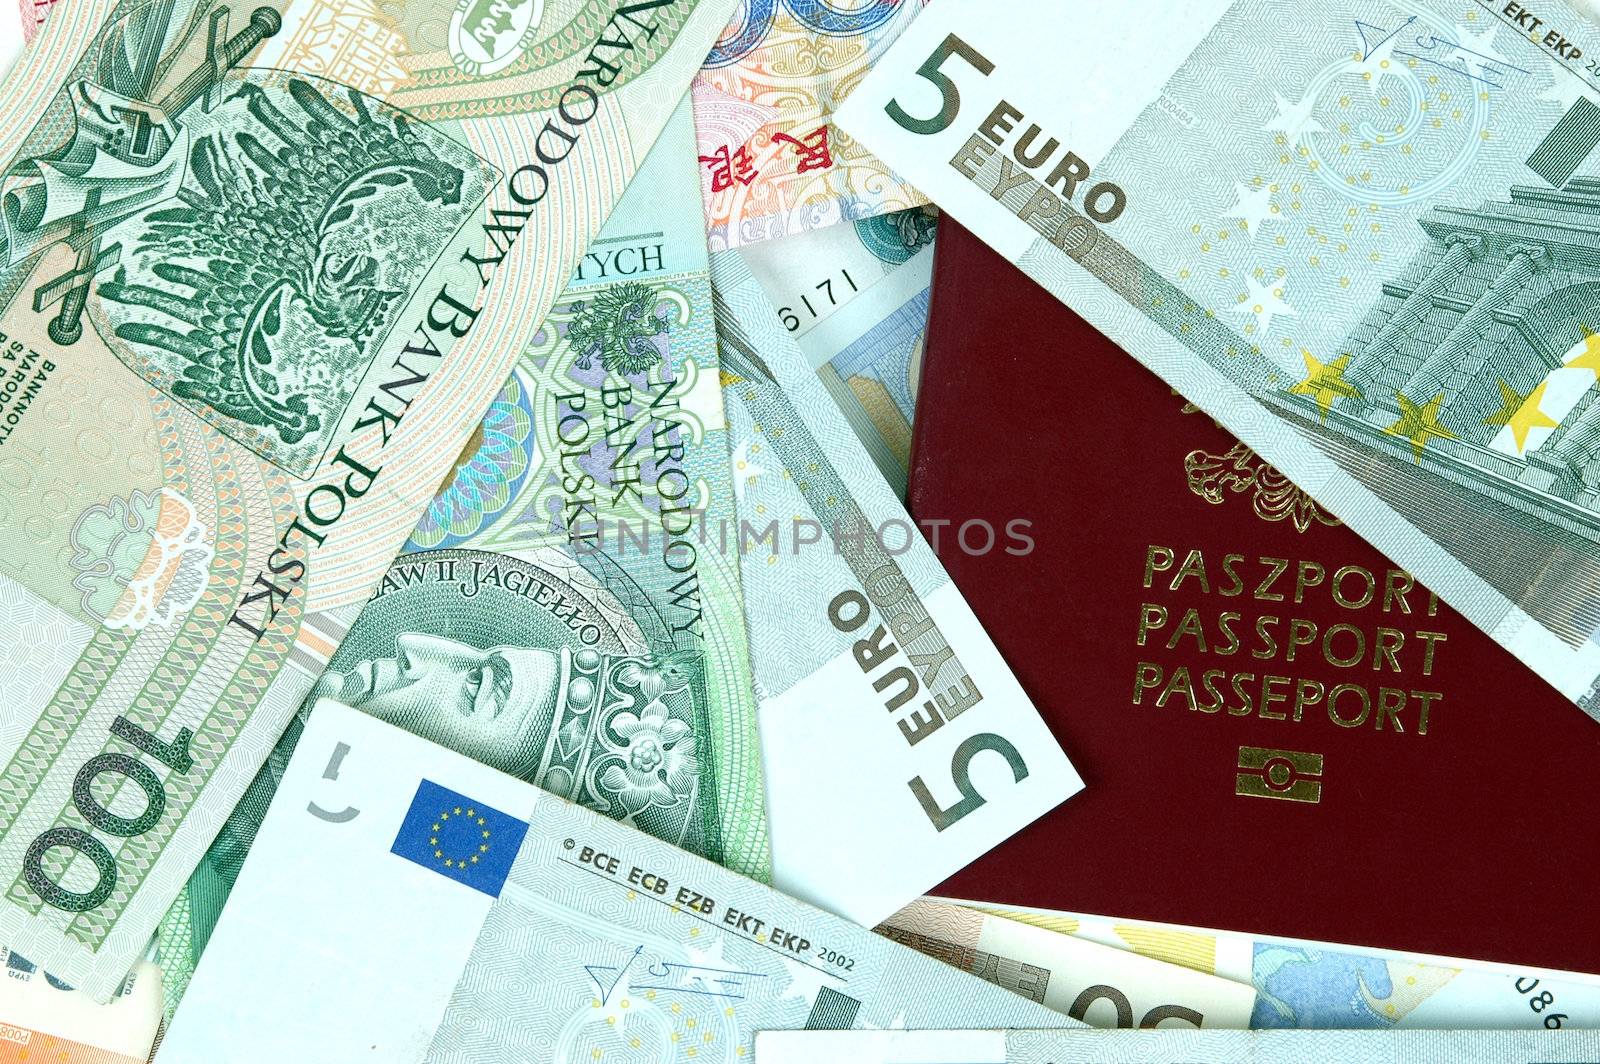 Closeup photo of European passport cover with different banknotes from Europe, China, Poland and Hongkong.